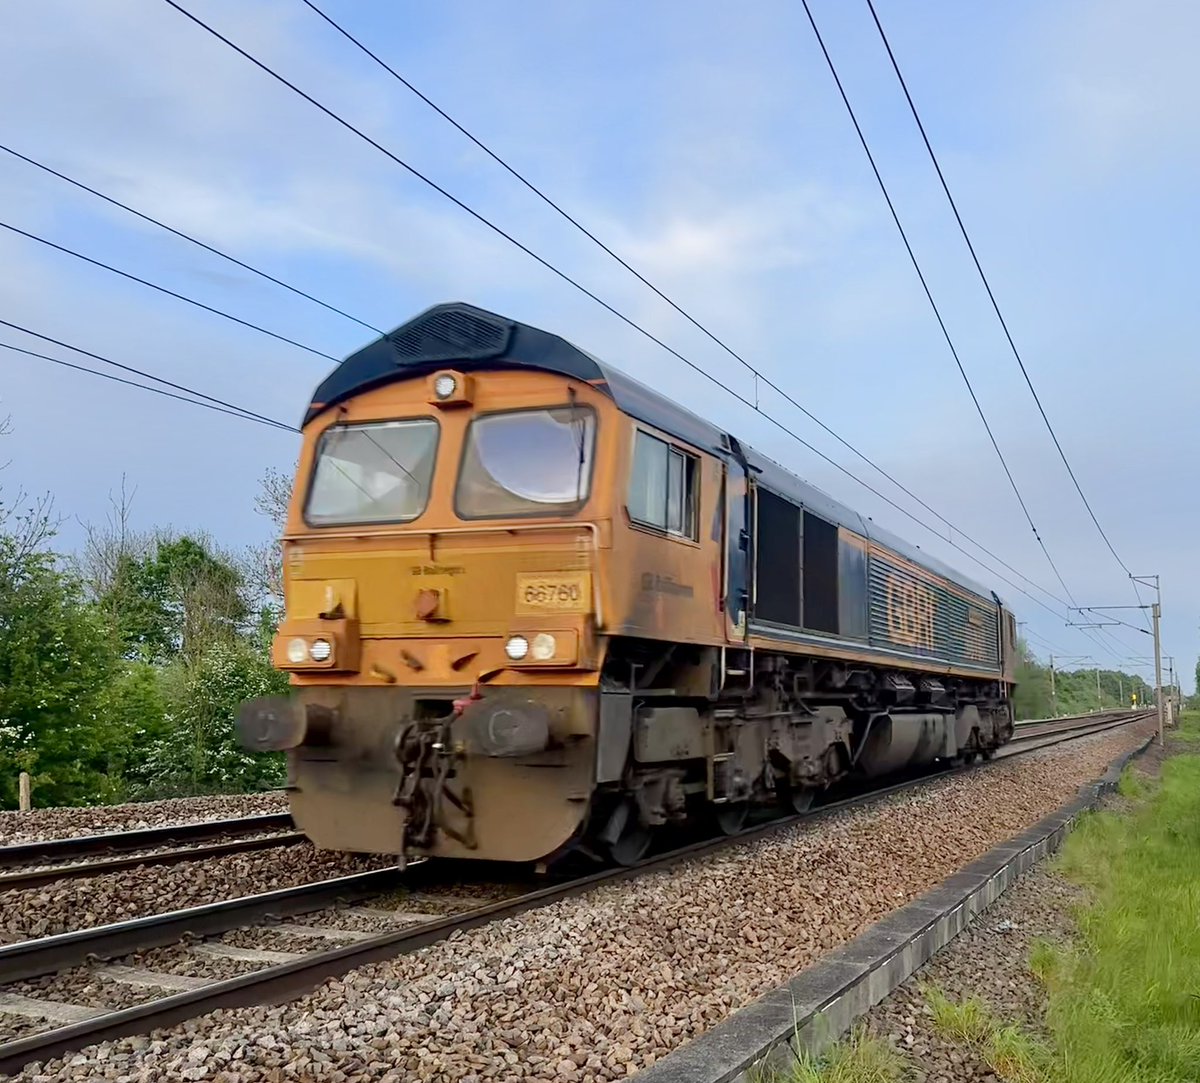 66760 at Crofton on this evenings 0Z22 Doncaster - Wrenthorpe #class66